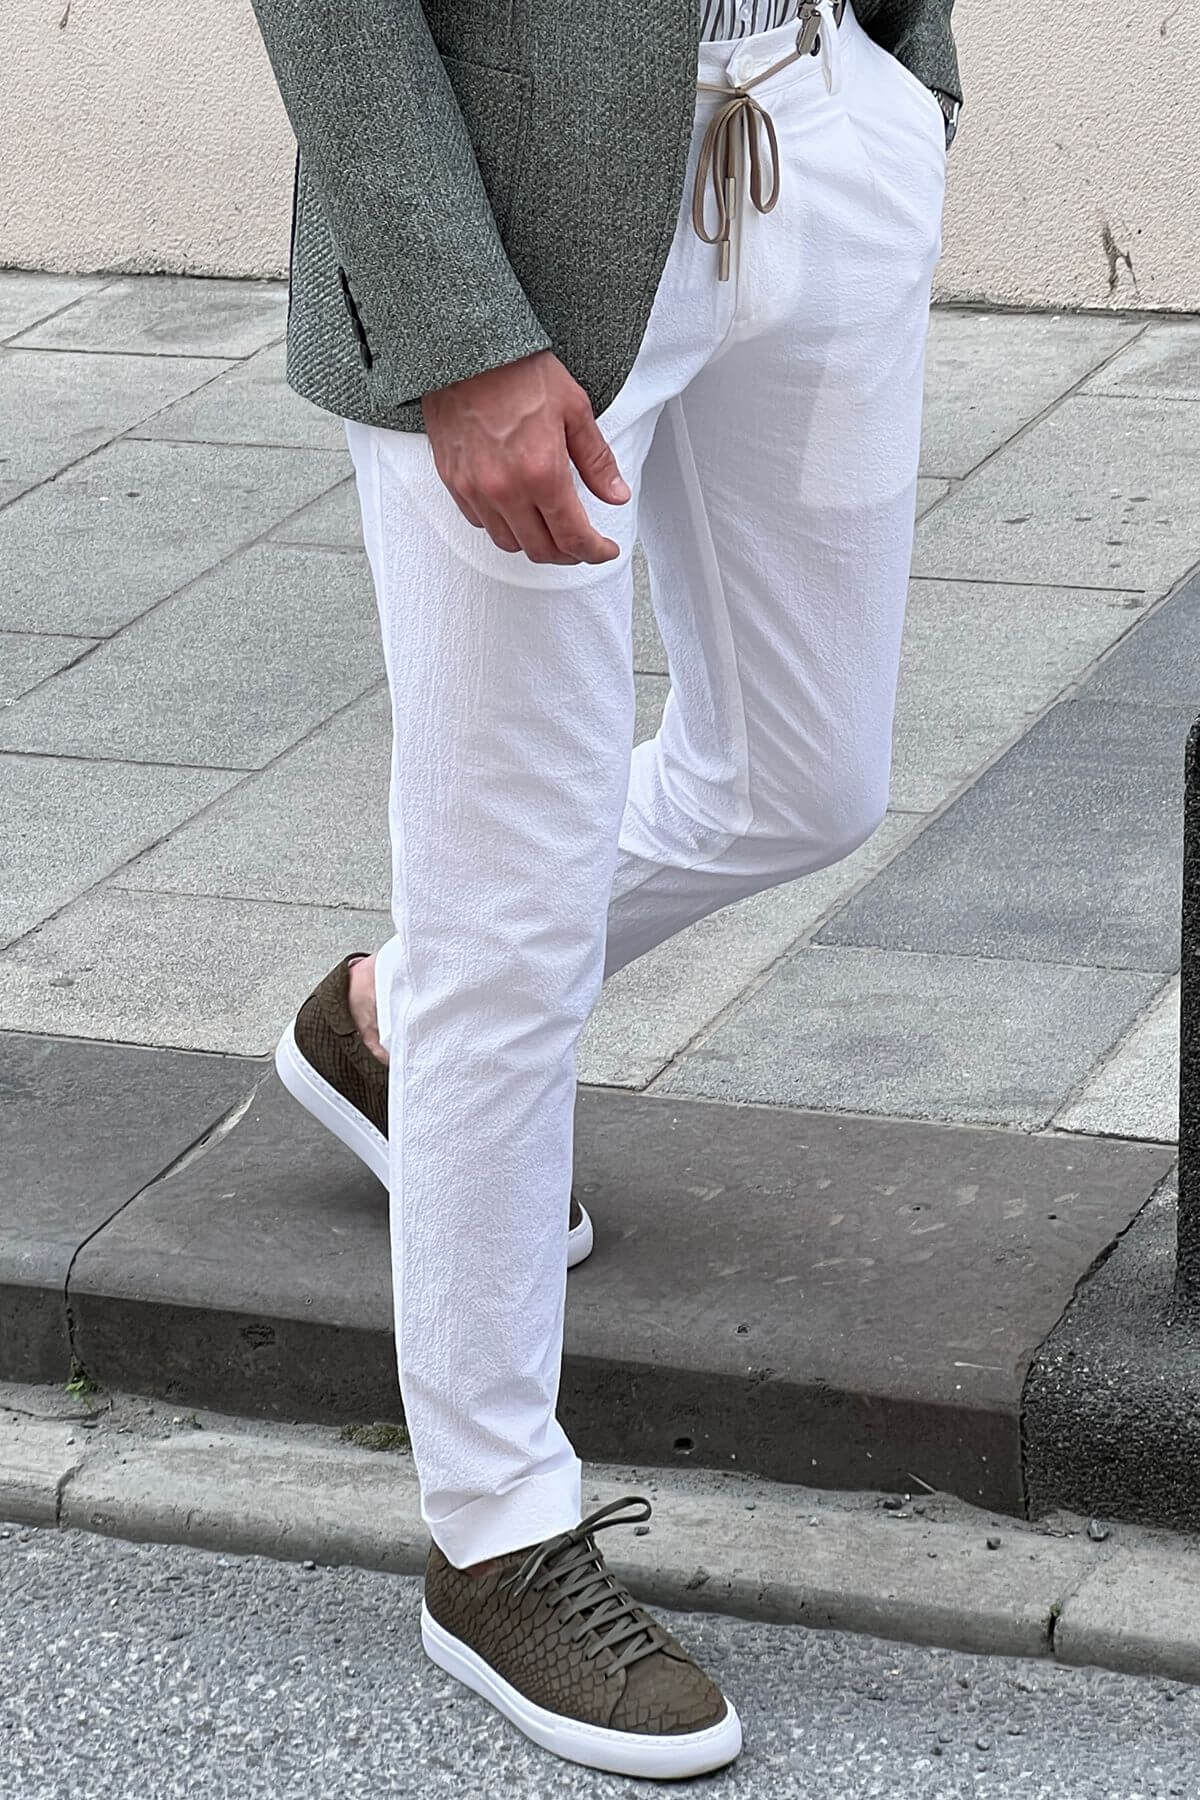 A Slim Fit White Cotton Trouser on display